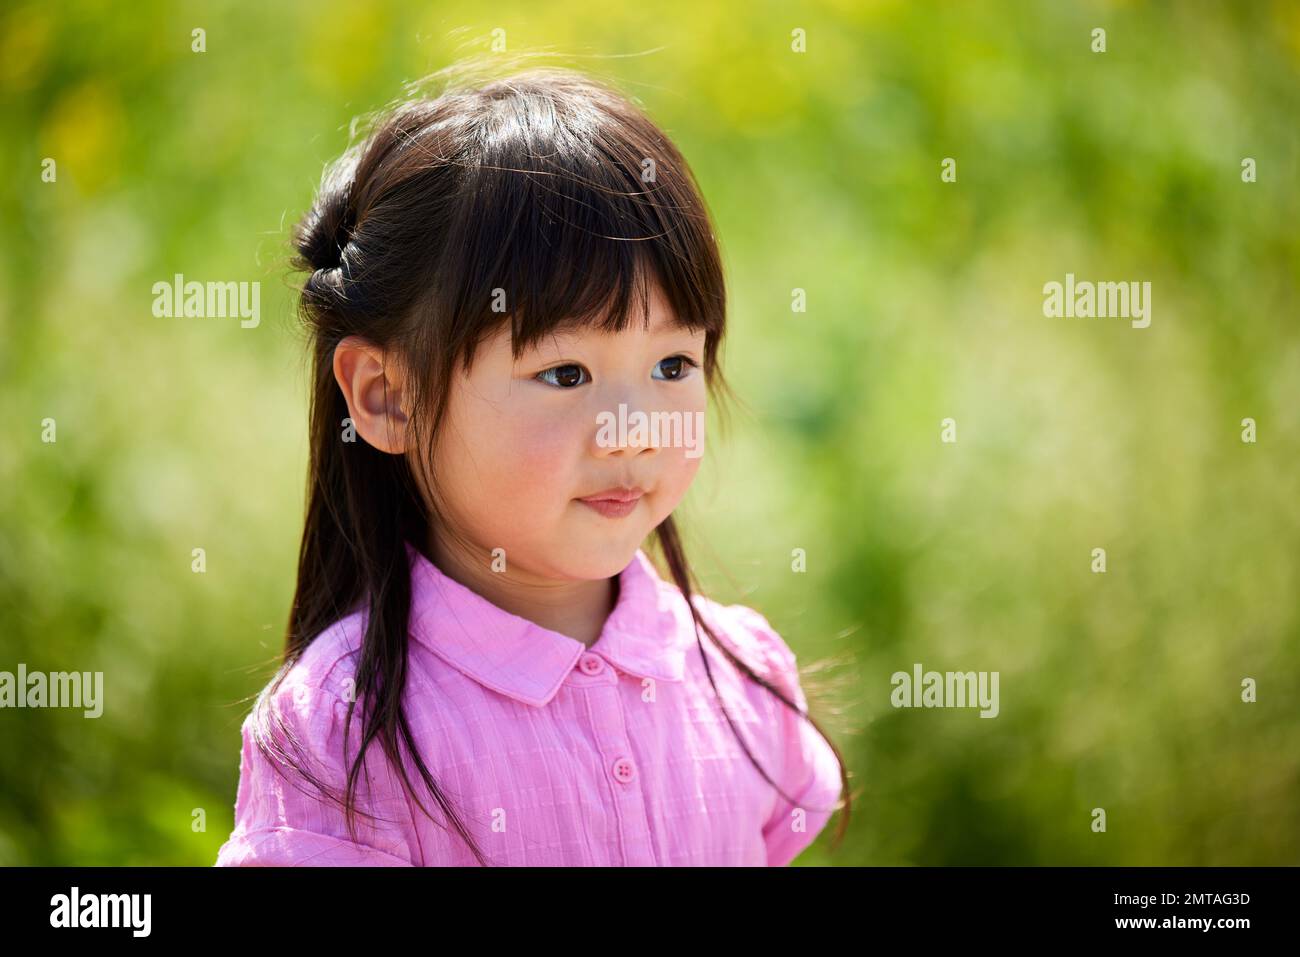 Japanese kid portrait in a city park Stock Photo